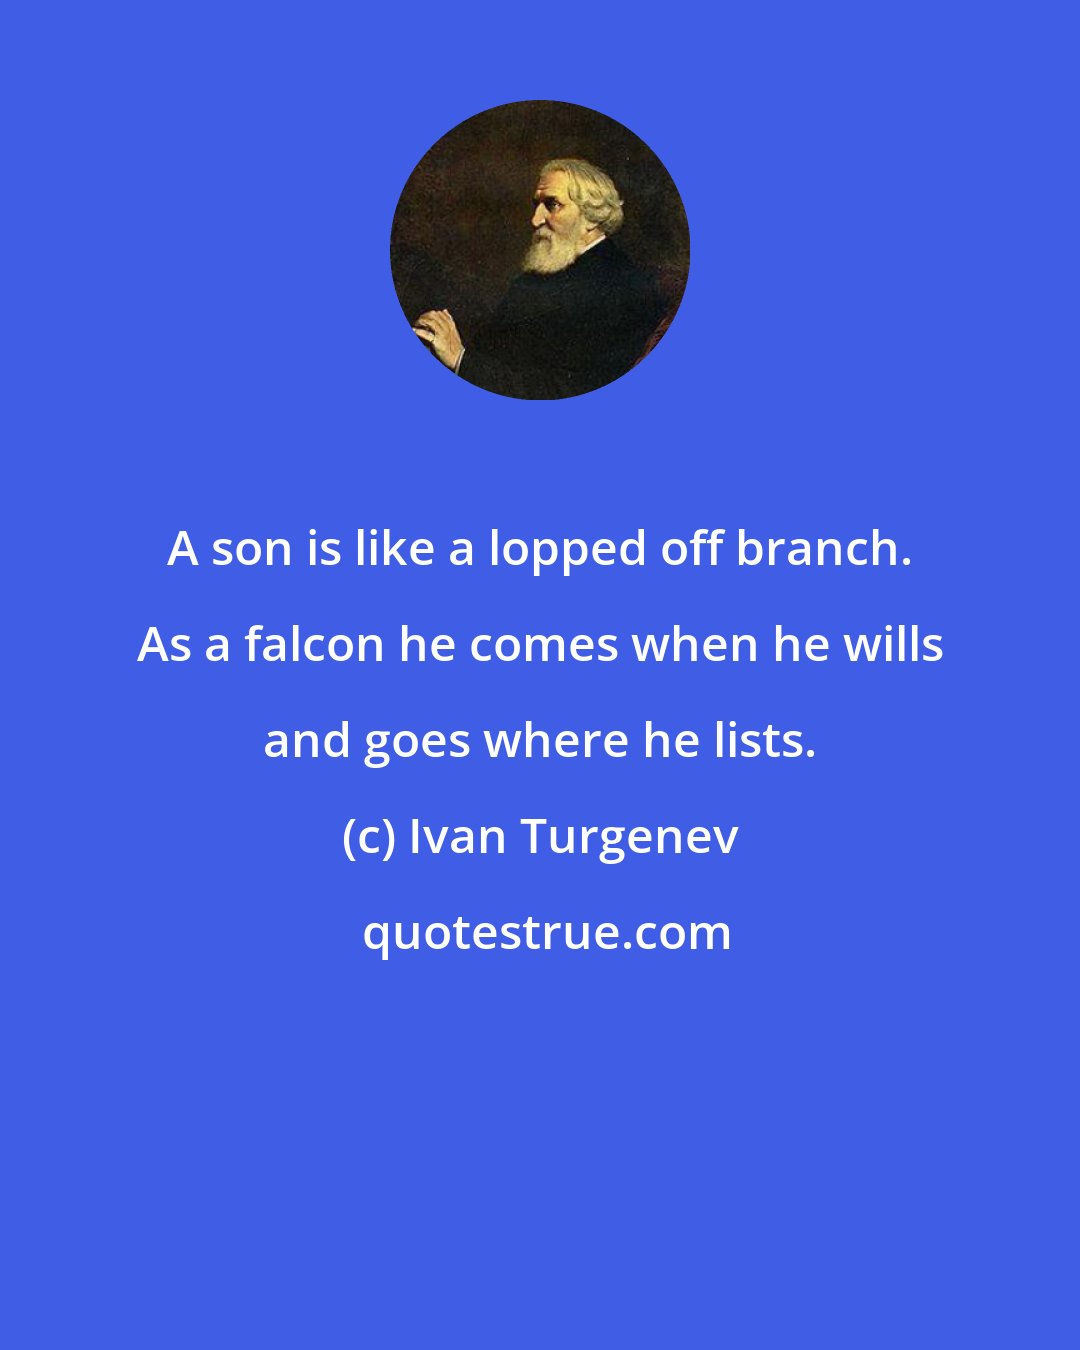 Ivan Turgenev: A son is like a lopped off branch. As a falcon he comes when he wills and goes where he lists.